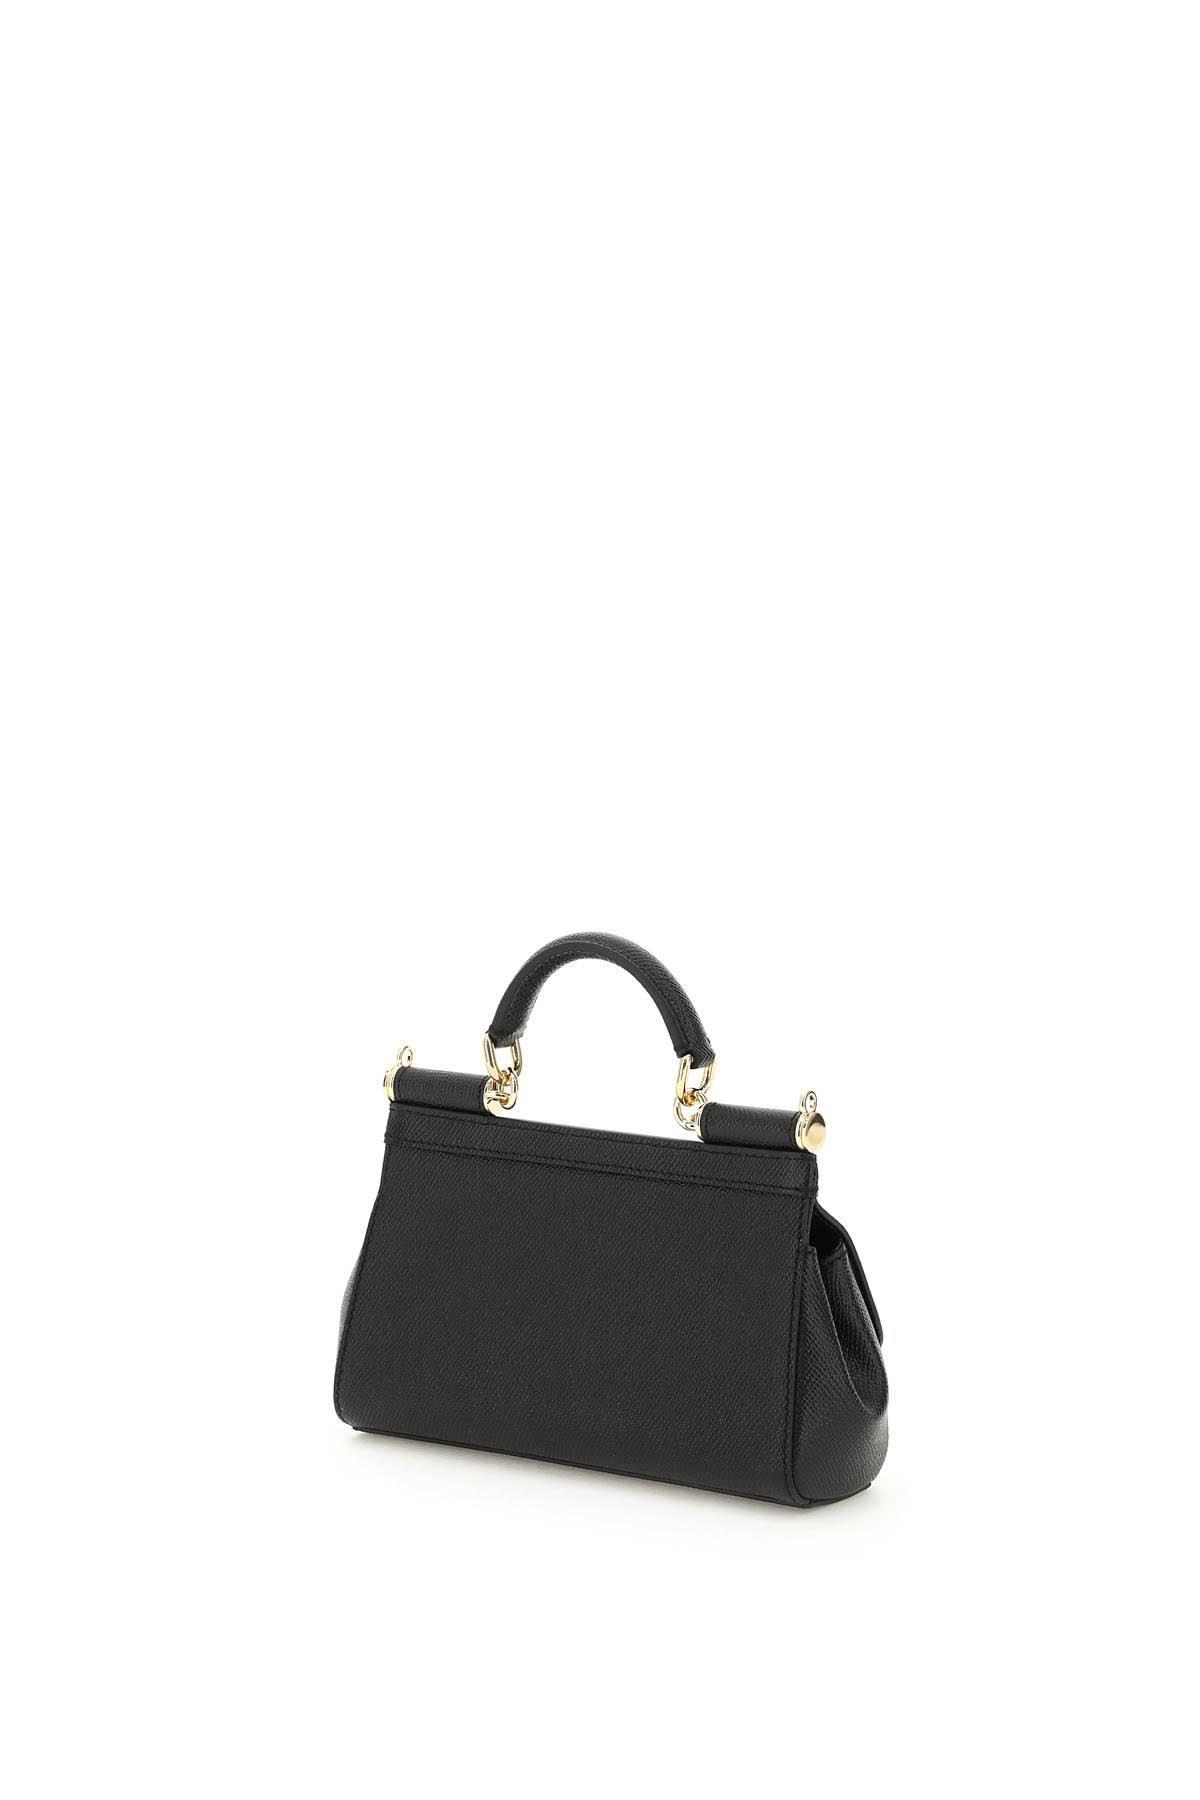 Dolce&Gabbana Small Sicily Dauphine Black Leather Top Handle